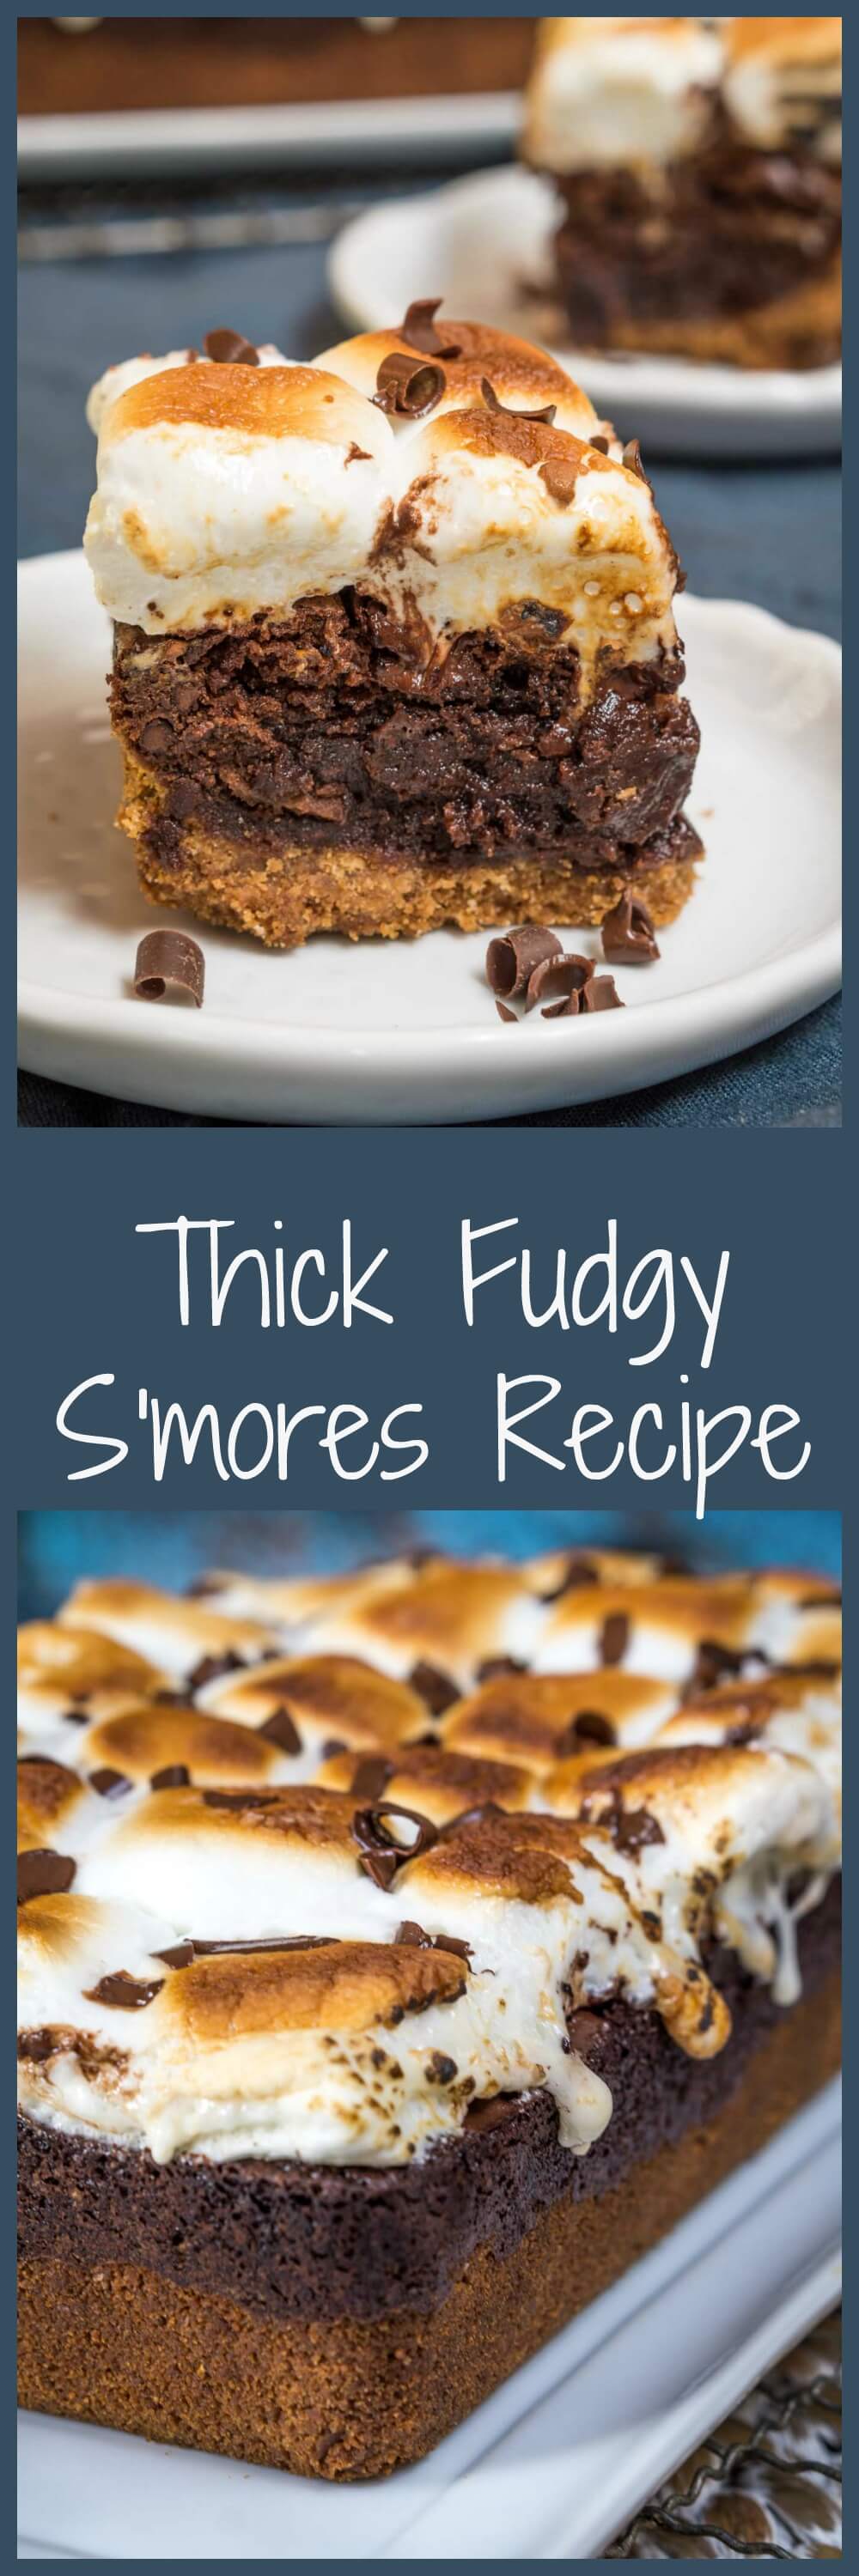 Two photo collage for Pinterest with the title \"Thick Fudgy S\'mores Recipe\" running through the center. The top photo is Sideview of a piece of S\'mores chocolate dessert with a bottom layer of graham cracker under a layer of chocolate and topped with toasted marshmallow sitting on a white plate over a blue napkin. A second plate sits in the background. The bottom photo is an angled photo of the full S\'mores dessert.